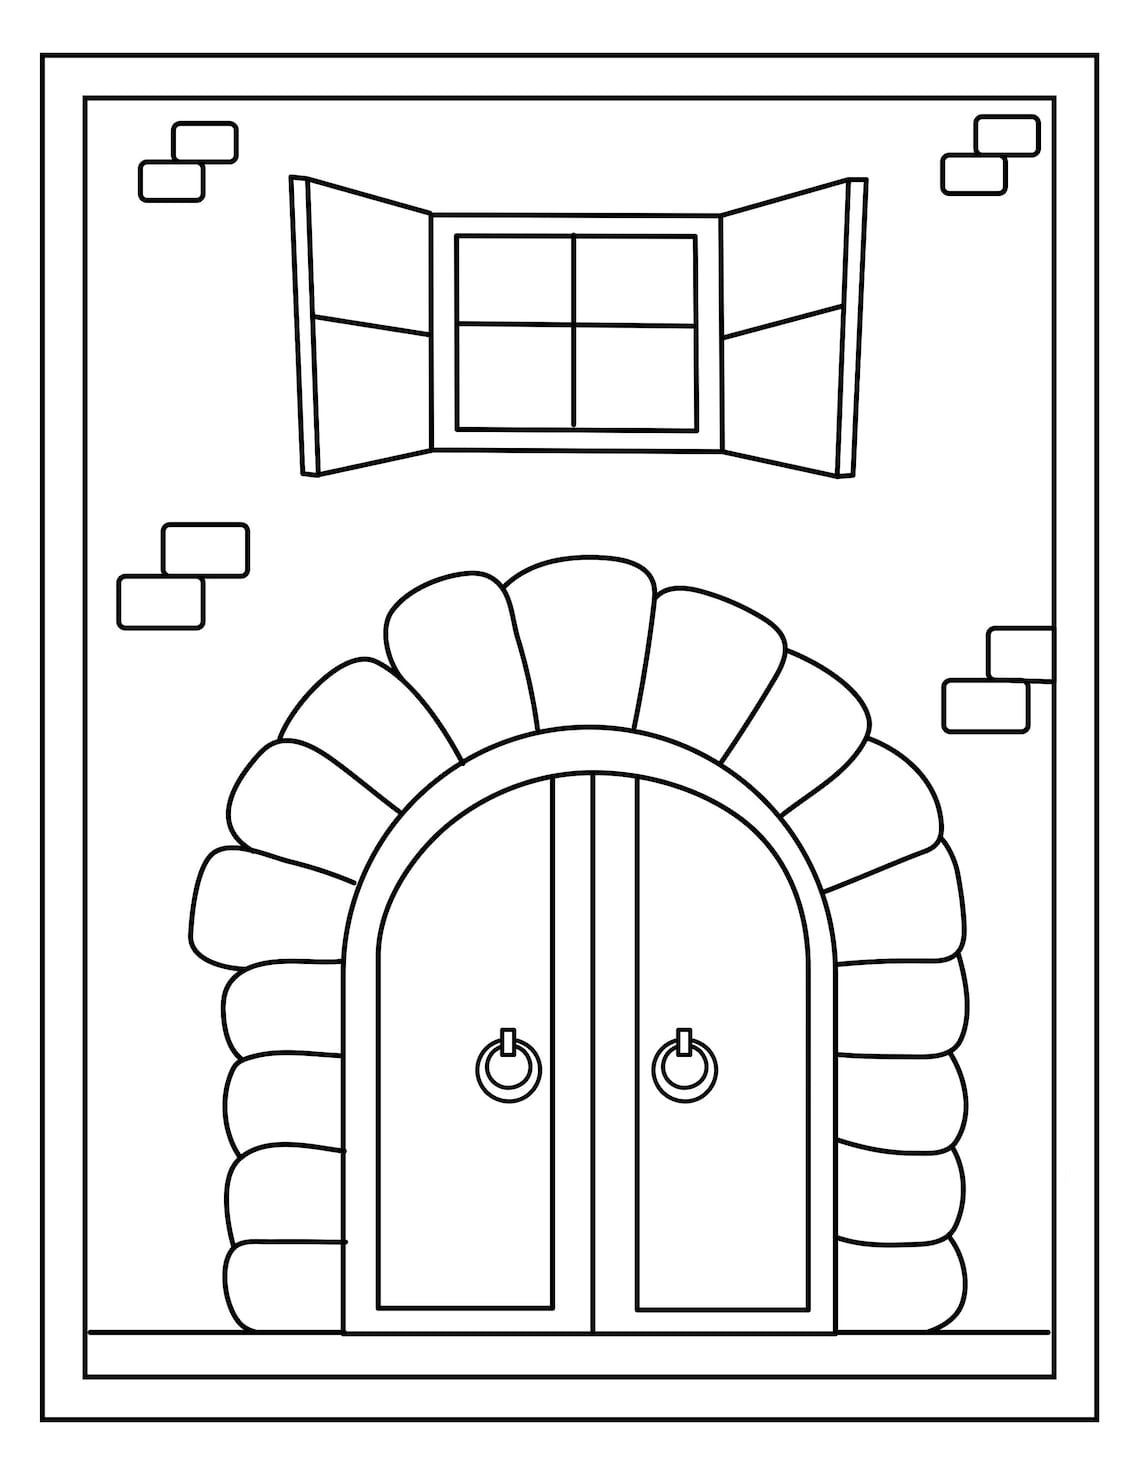 Doors 16 Coloring Printable Pages | Etsy